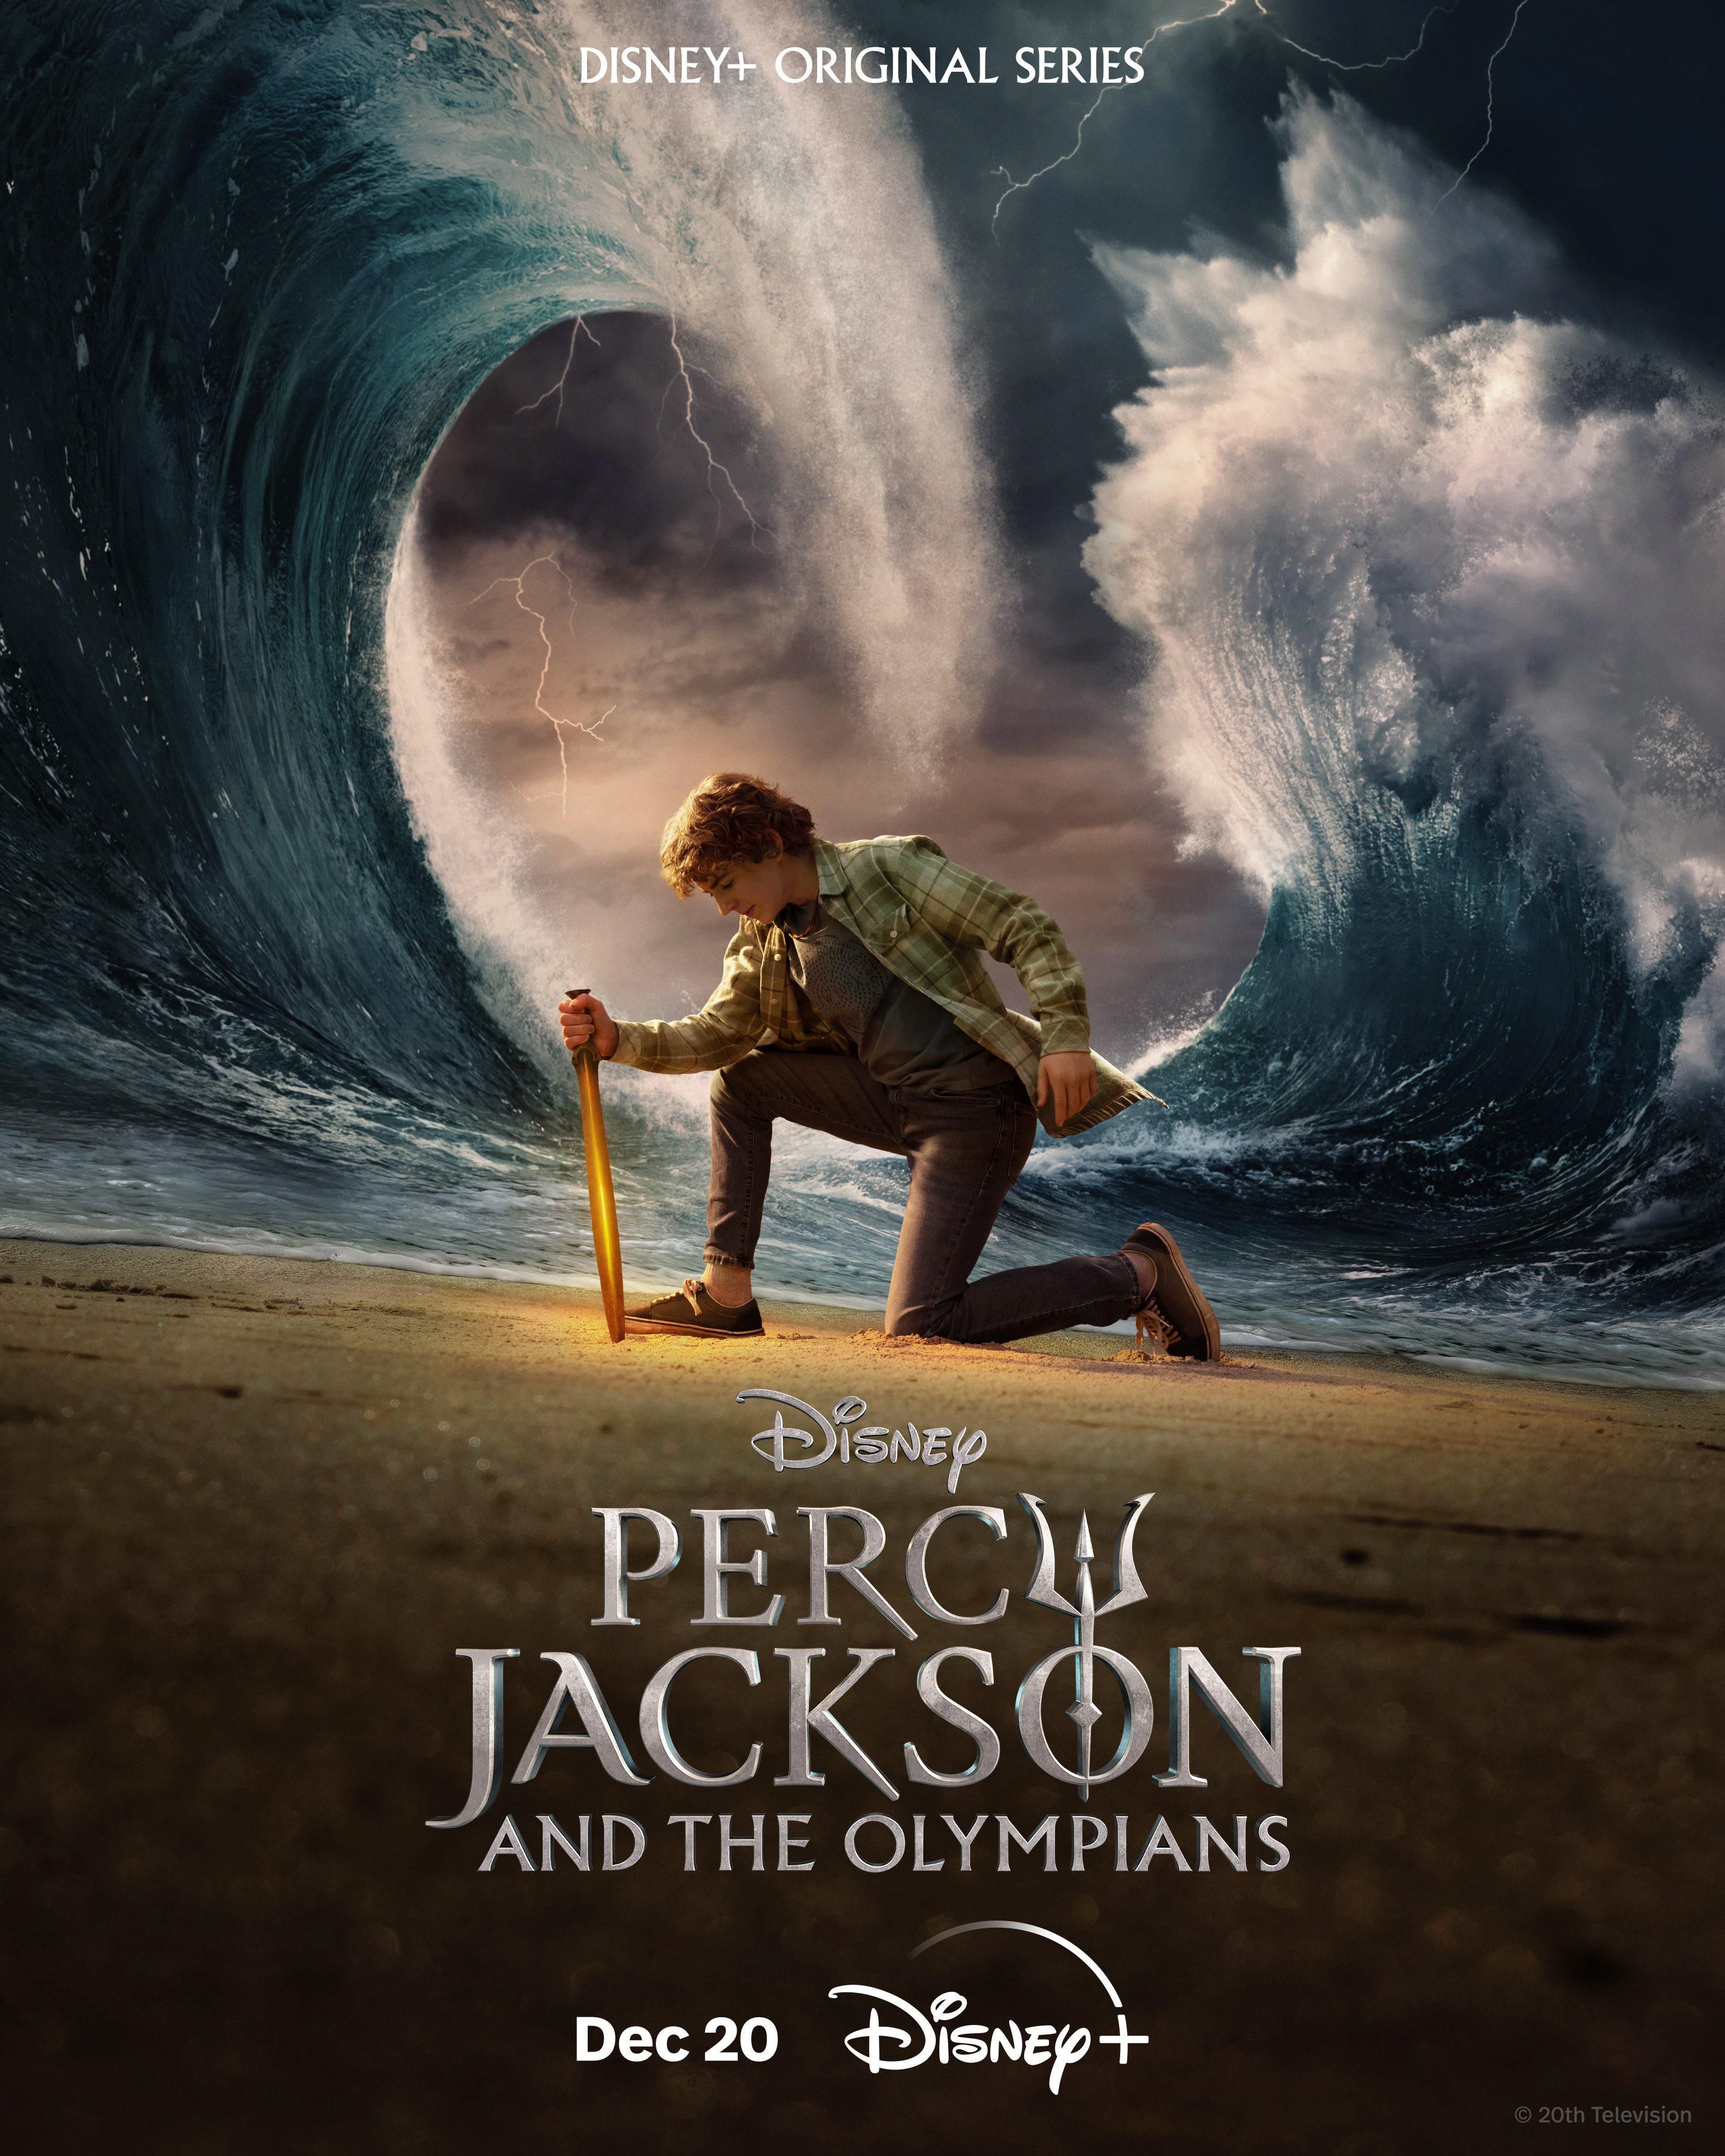 Walker Scobell as Percy Jackson, holding a blade into the sand while massive waves rise around him in a poster for Percy Jackson and the Olympians.